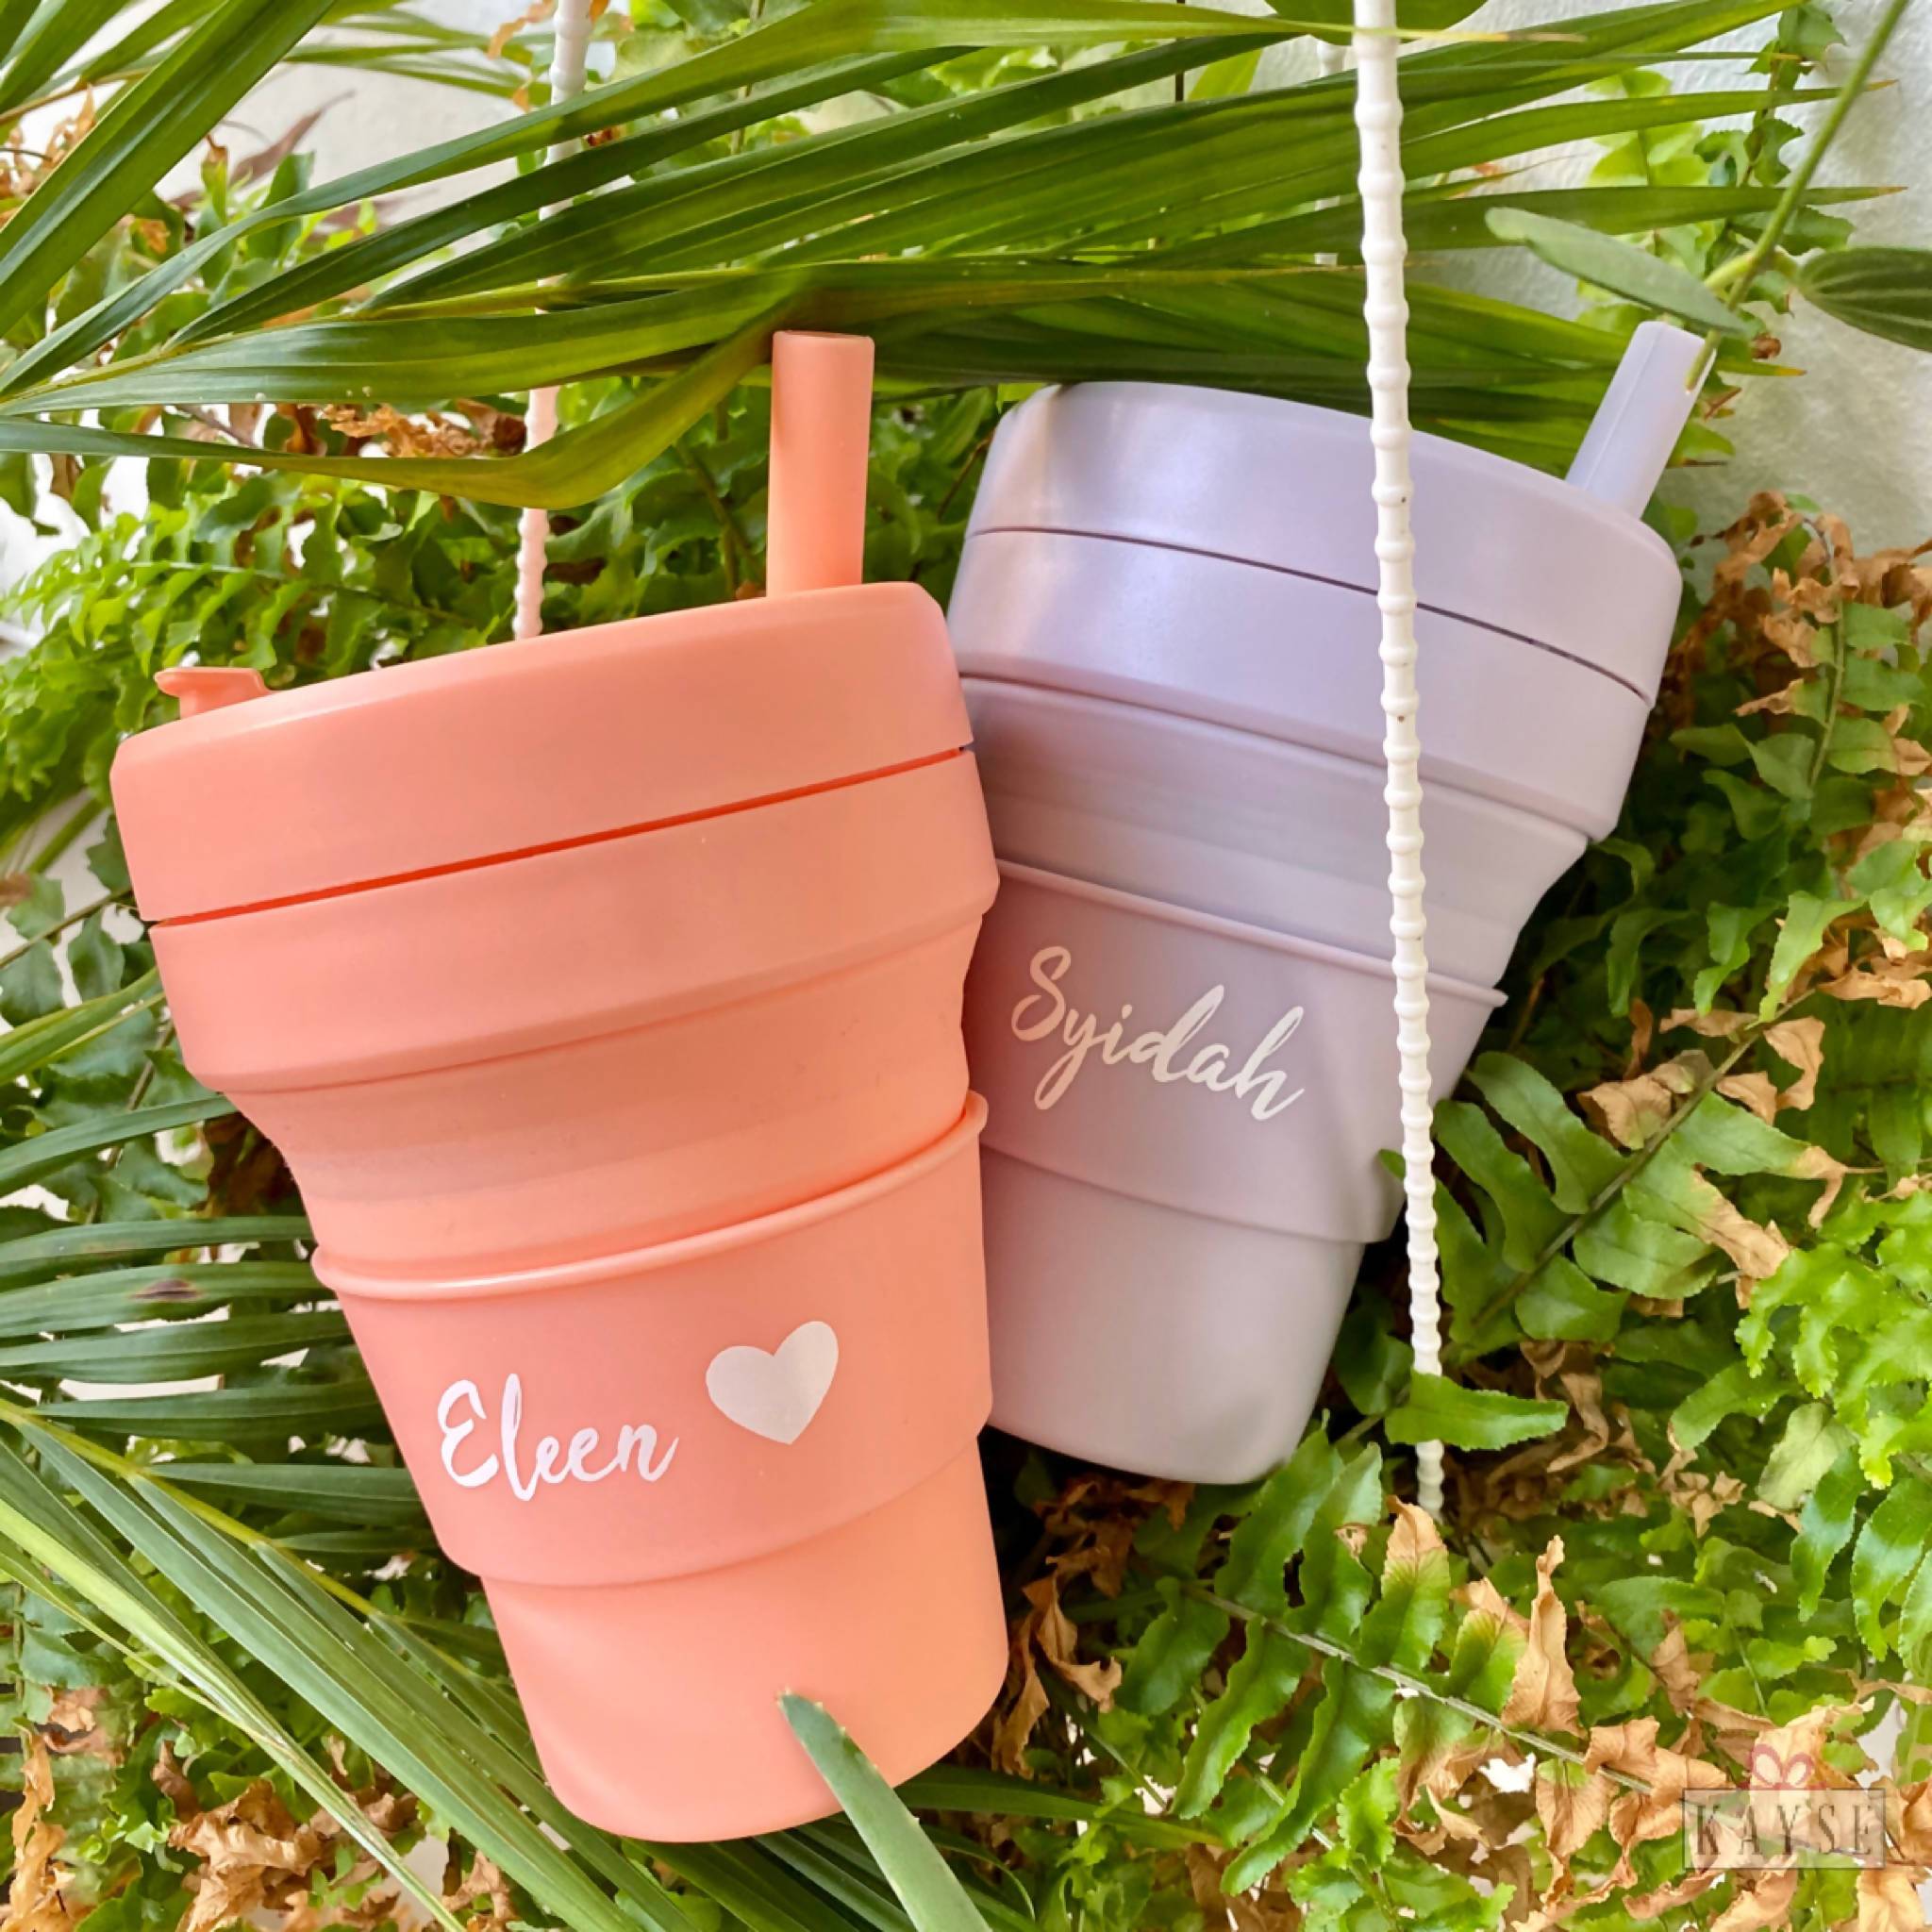 Personalised Stojo Cup Spring 2020 Collection (12oz & 16oz) - Personalised Tumblers - KAYSE - Naiise